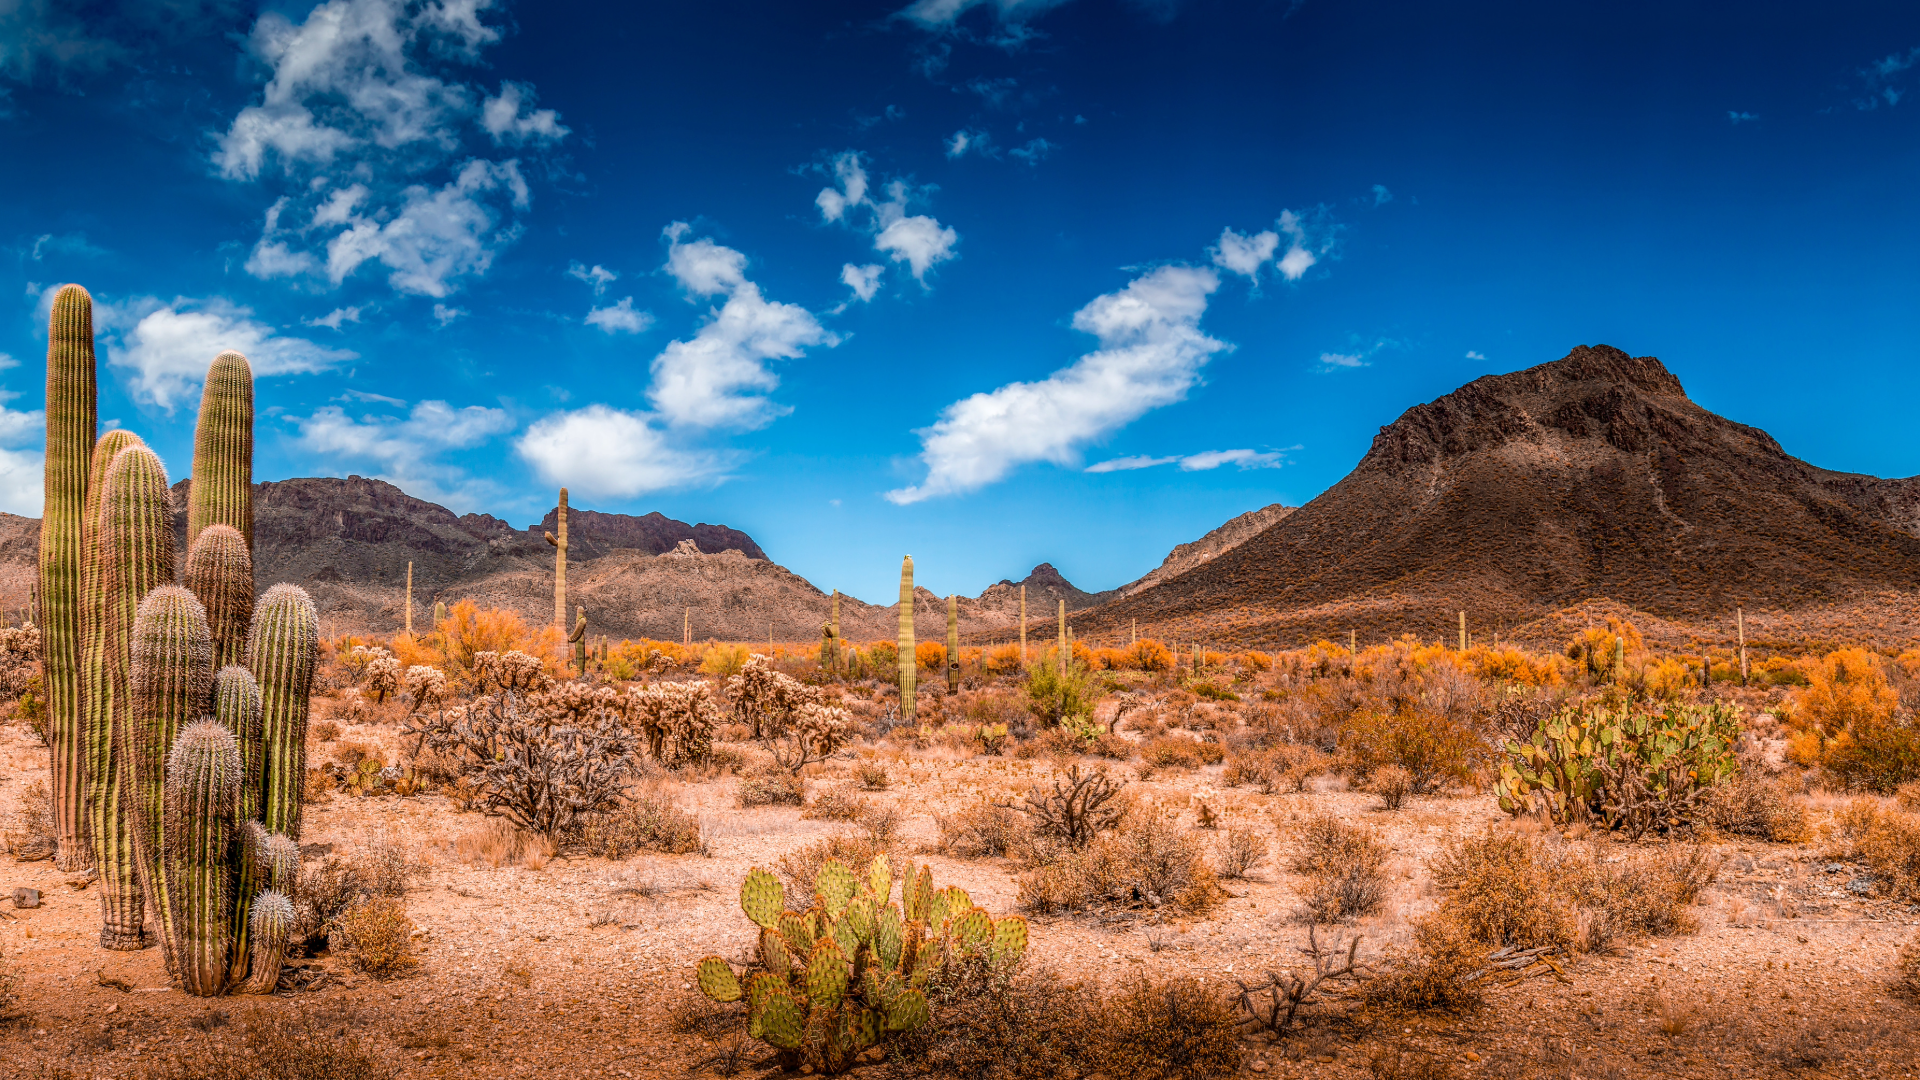 Saguaro cacti dominating arid desert landscape with rugged mountains under a cloudy blue sky in the Southwest United States.